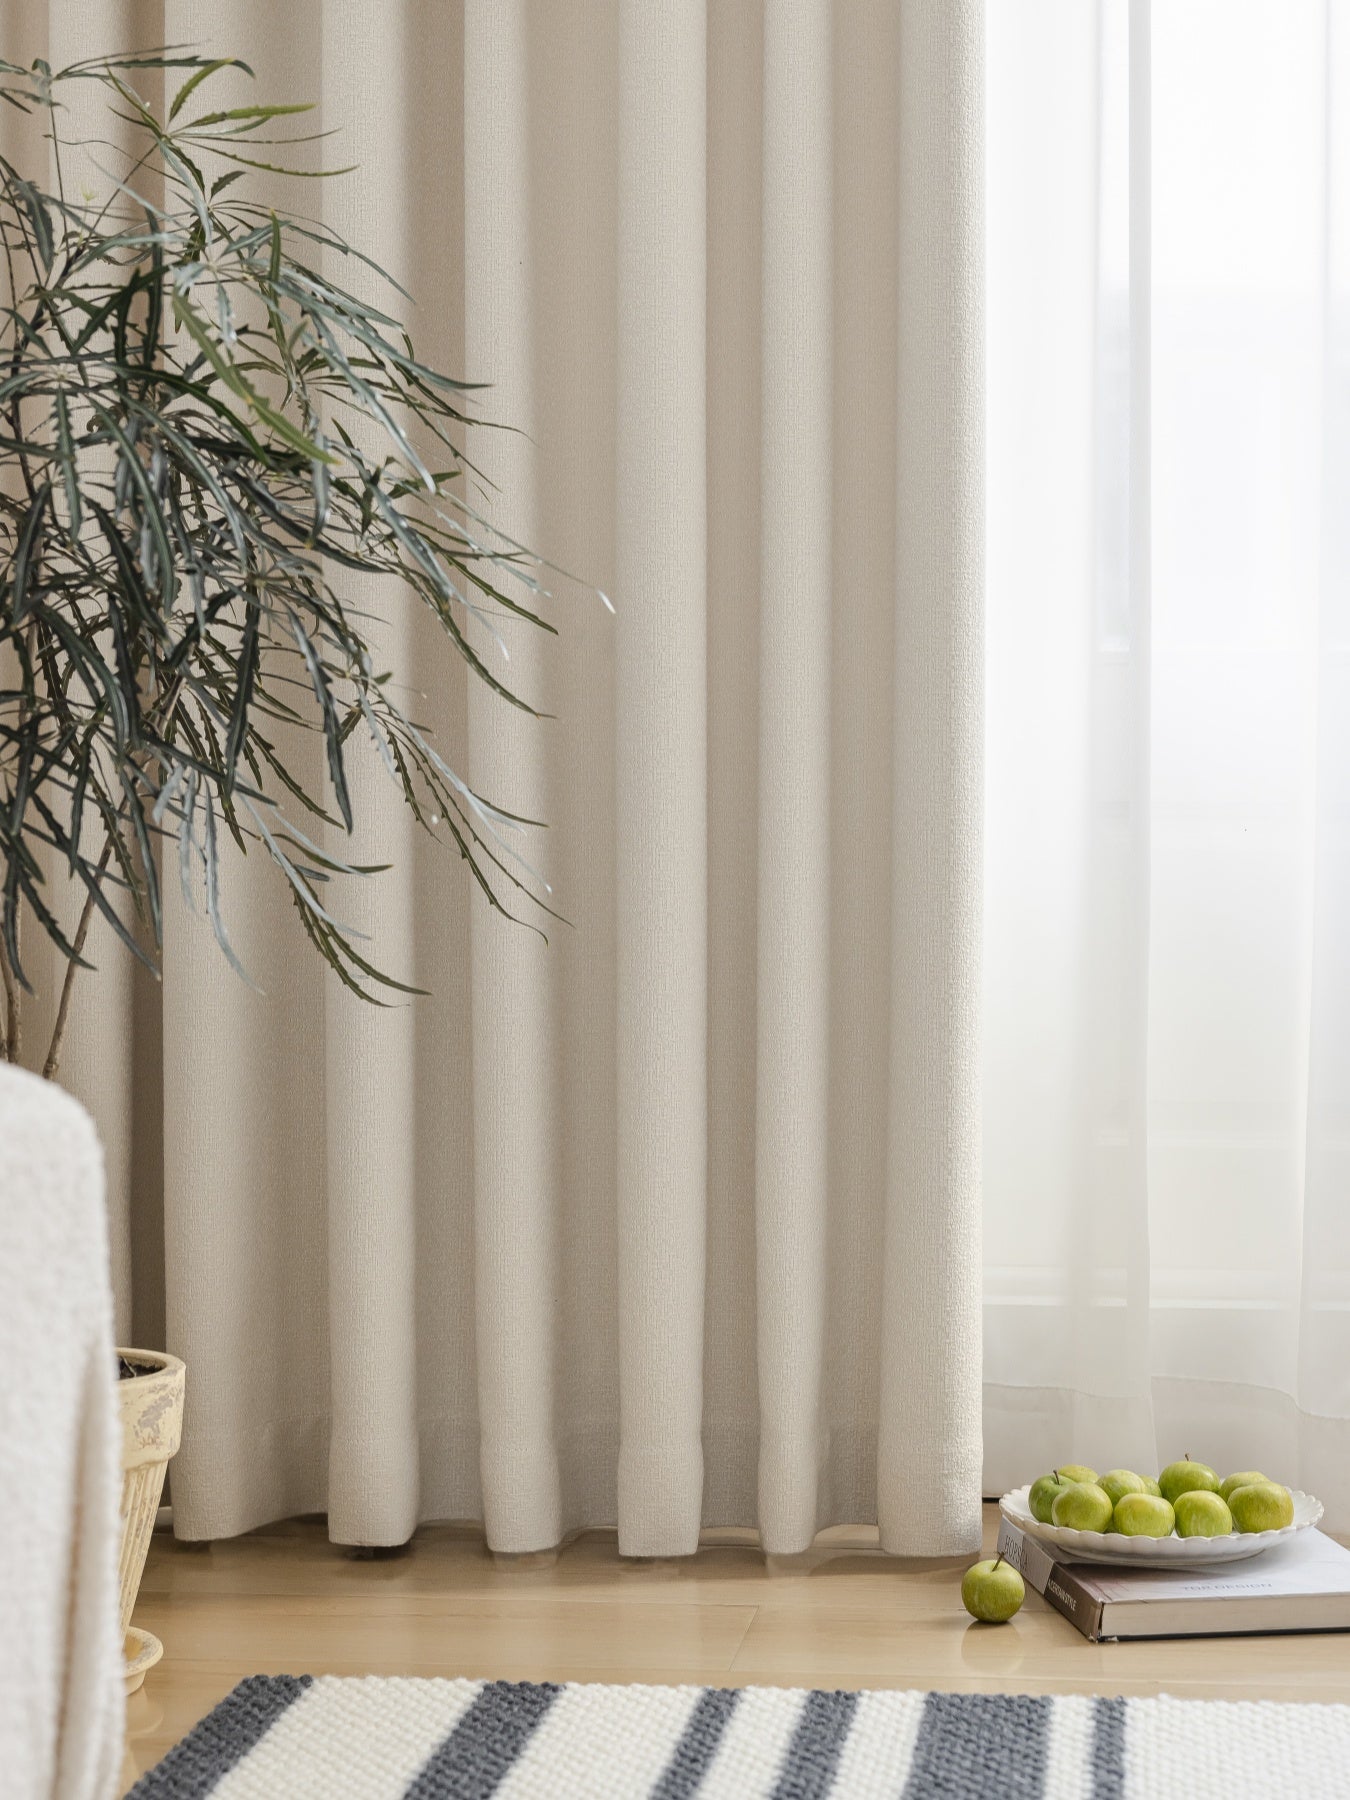 Heavyweight linen blend pleated curtains in cream color, enhancing a modern living room with natural, eco-friendly decor